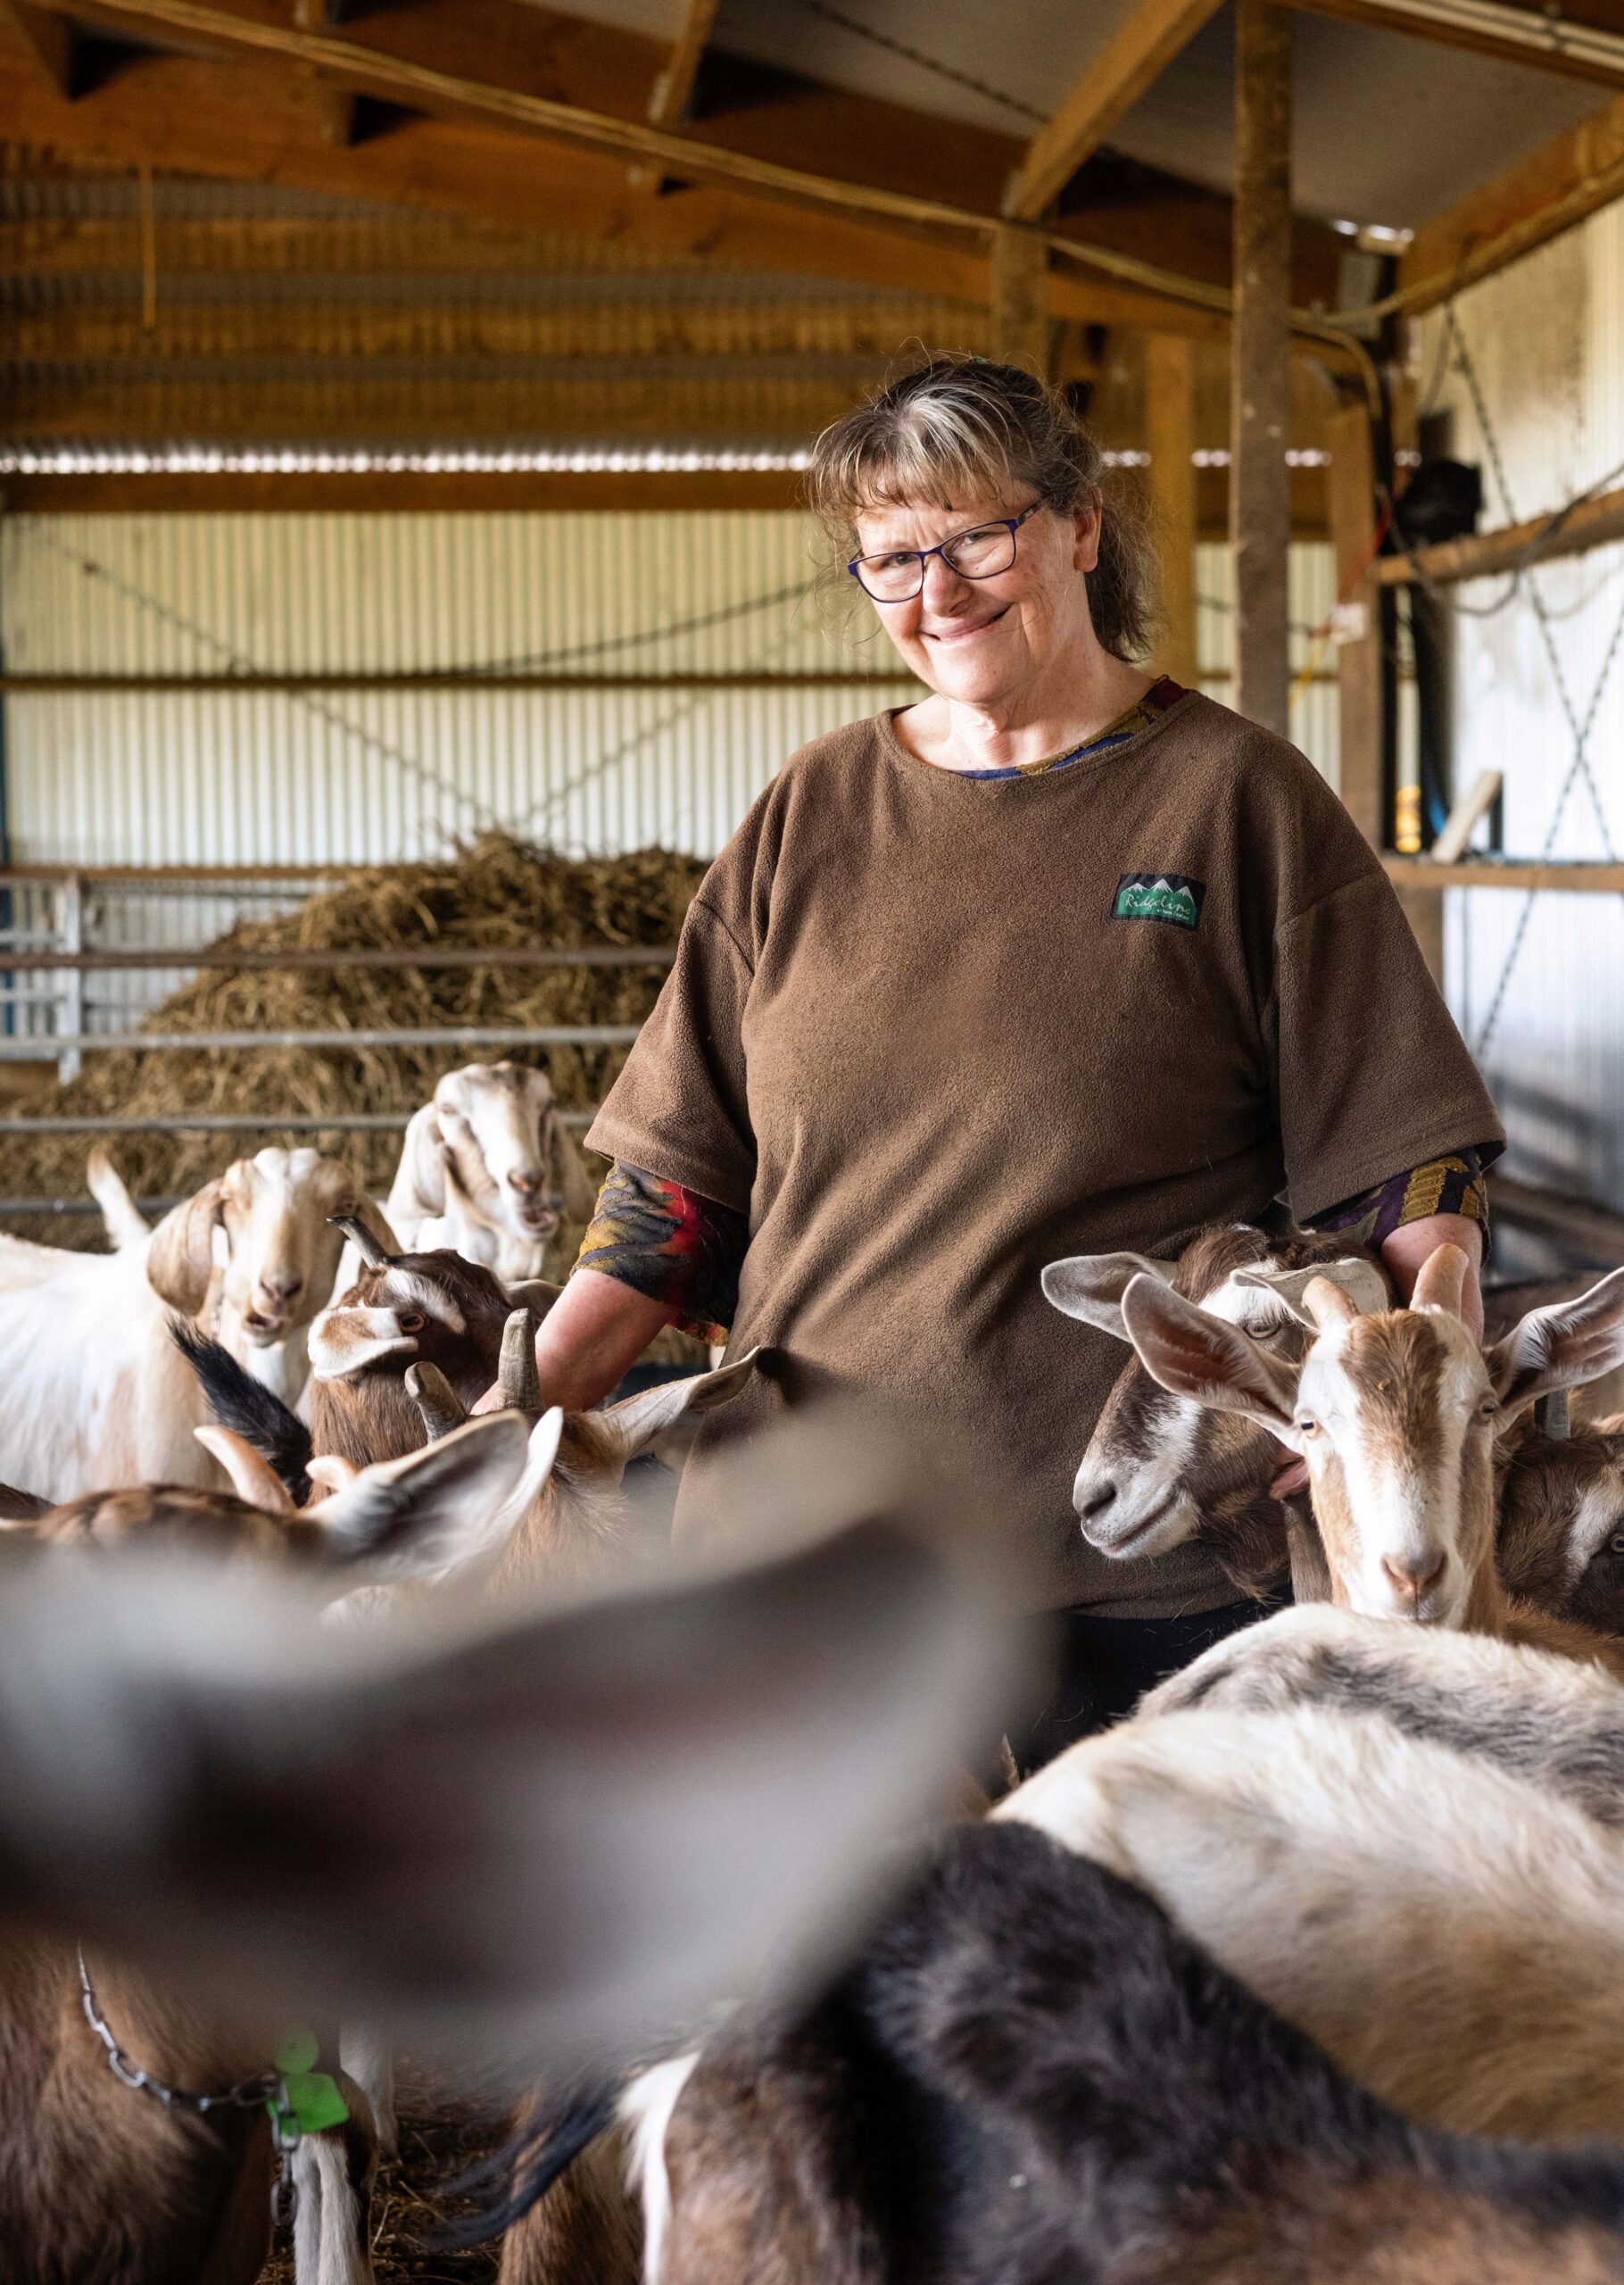 Annie Nieuwenhuis surrounded by her goats in a barn